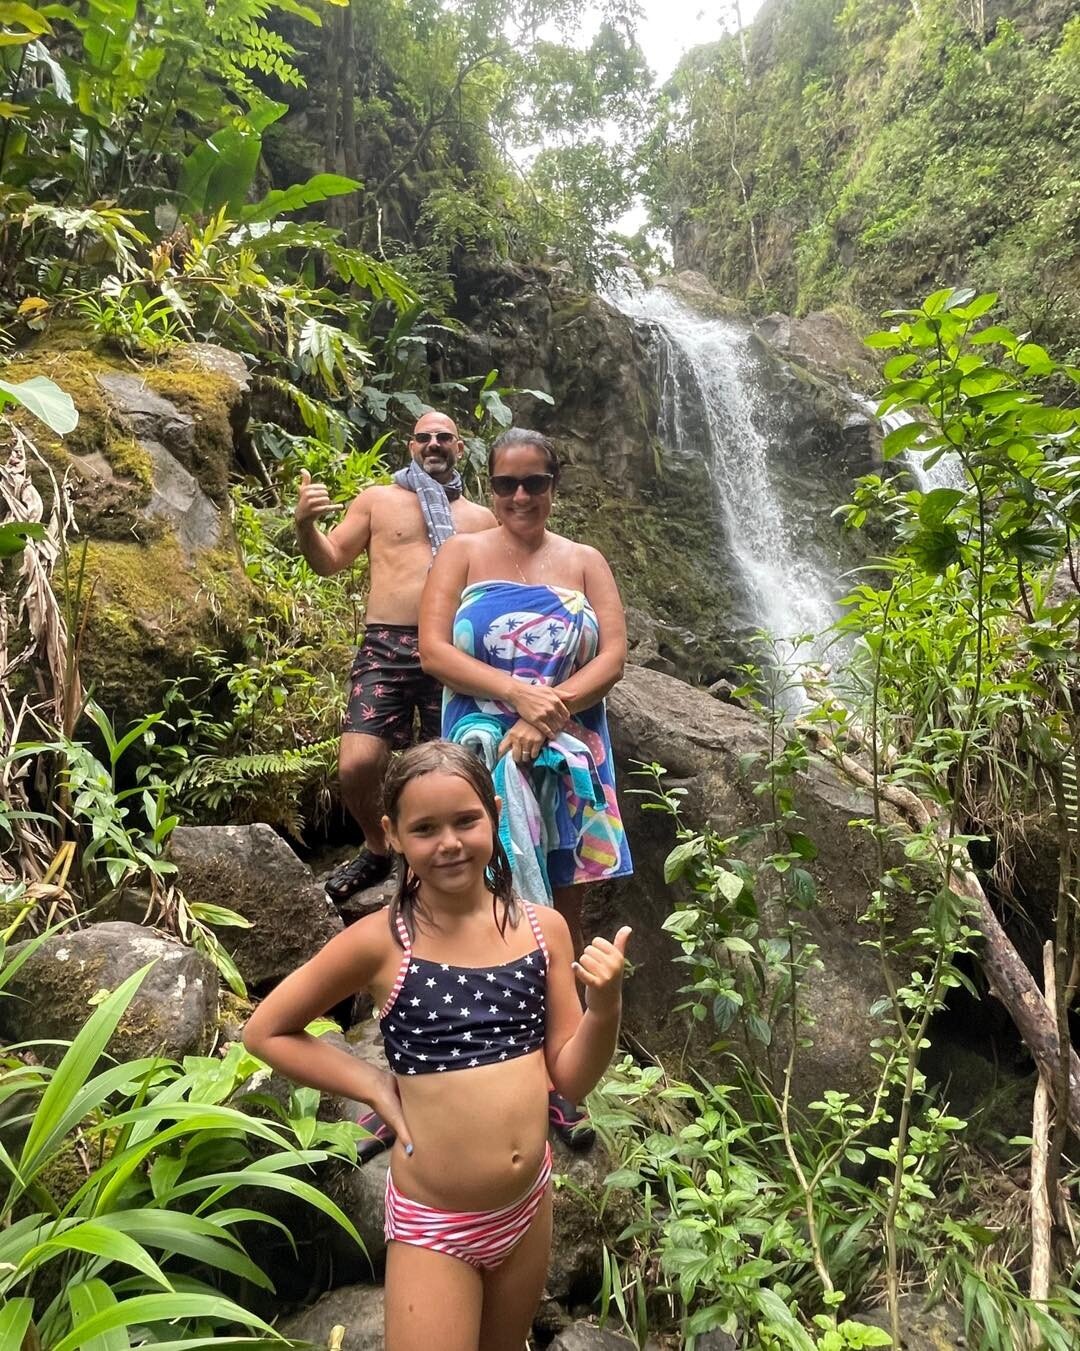 Don&rsquo;t forget to enjoy the natural beauty of Maui while visiting! We have guides who will safely take you off the beaten path to see the waterfalls, native plants and show you another side of Maui. 
&bull;
&bull;
&bull;
&bull;
#mauihawaii #water